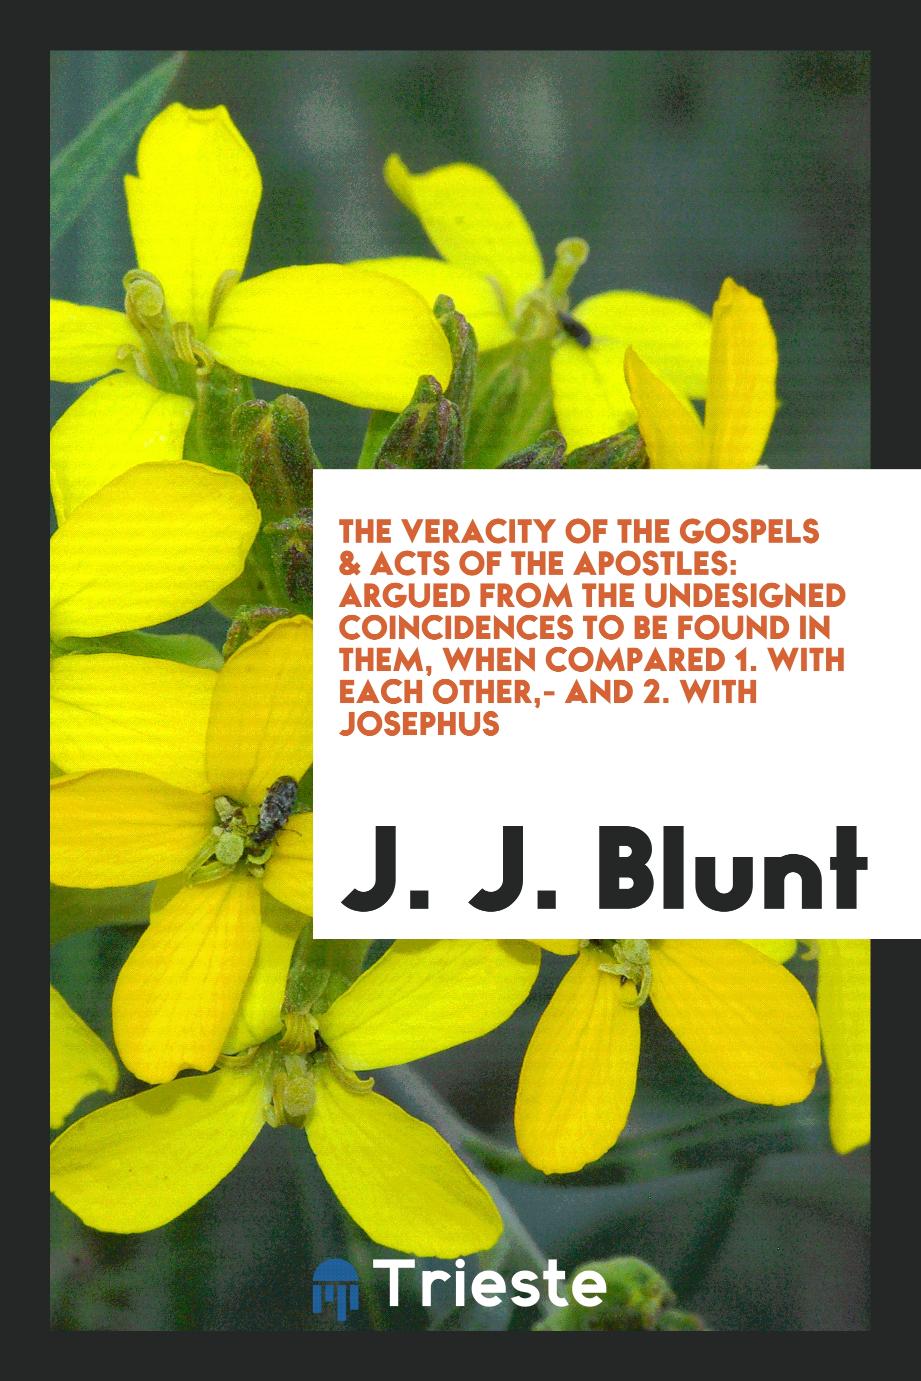 The Veracity of the Gospels & Acts of the Apostles: Argued from the Undesigned Coincidences to Be Found in Them, When Compared 1. With Each Other,- And 2. With Josephus